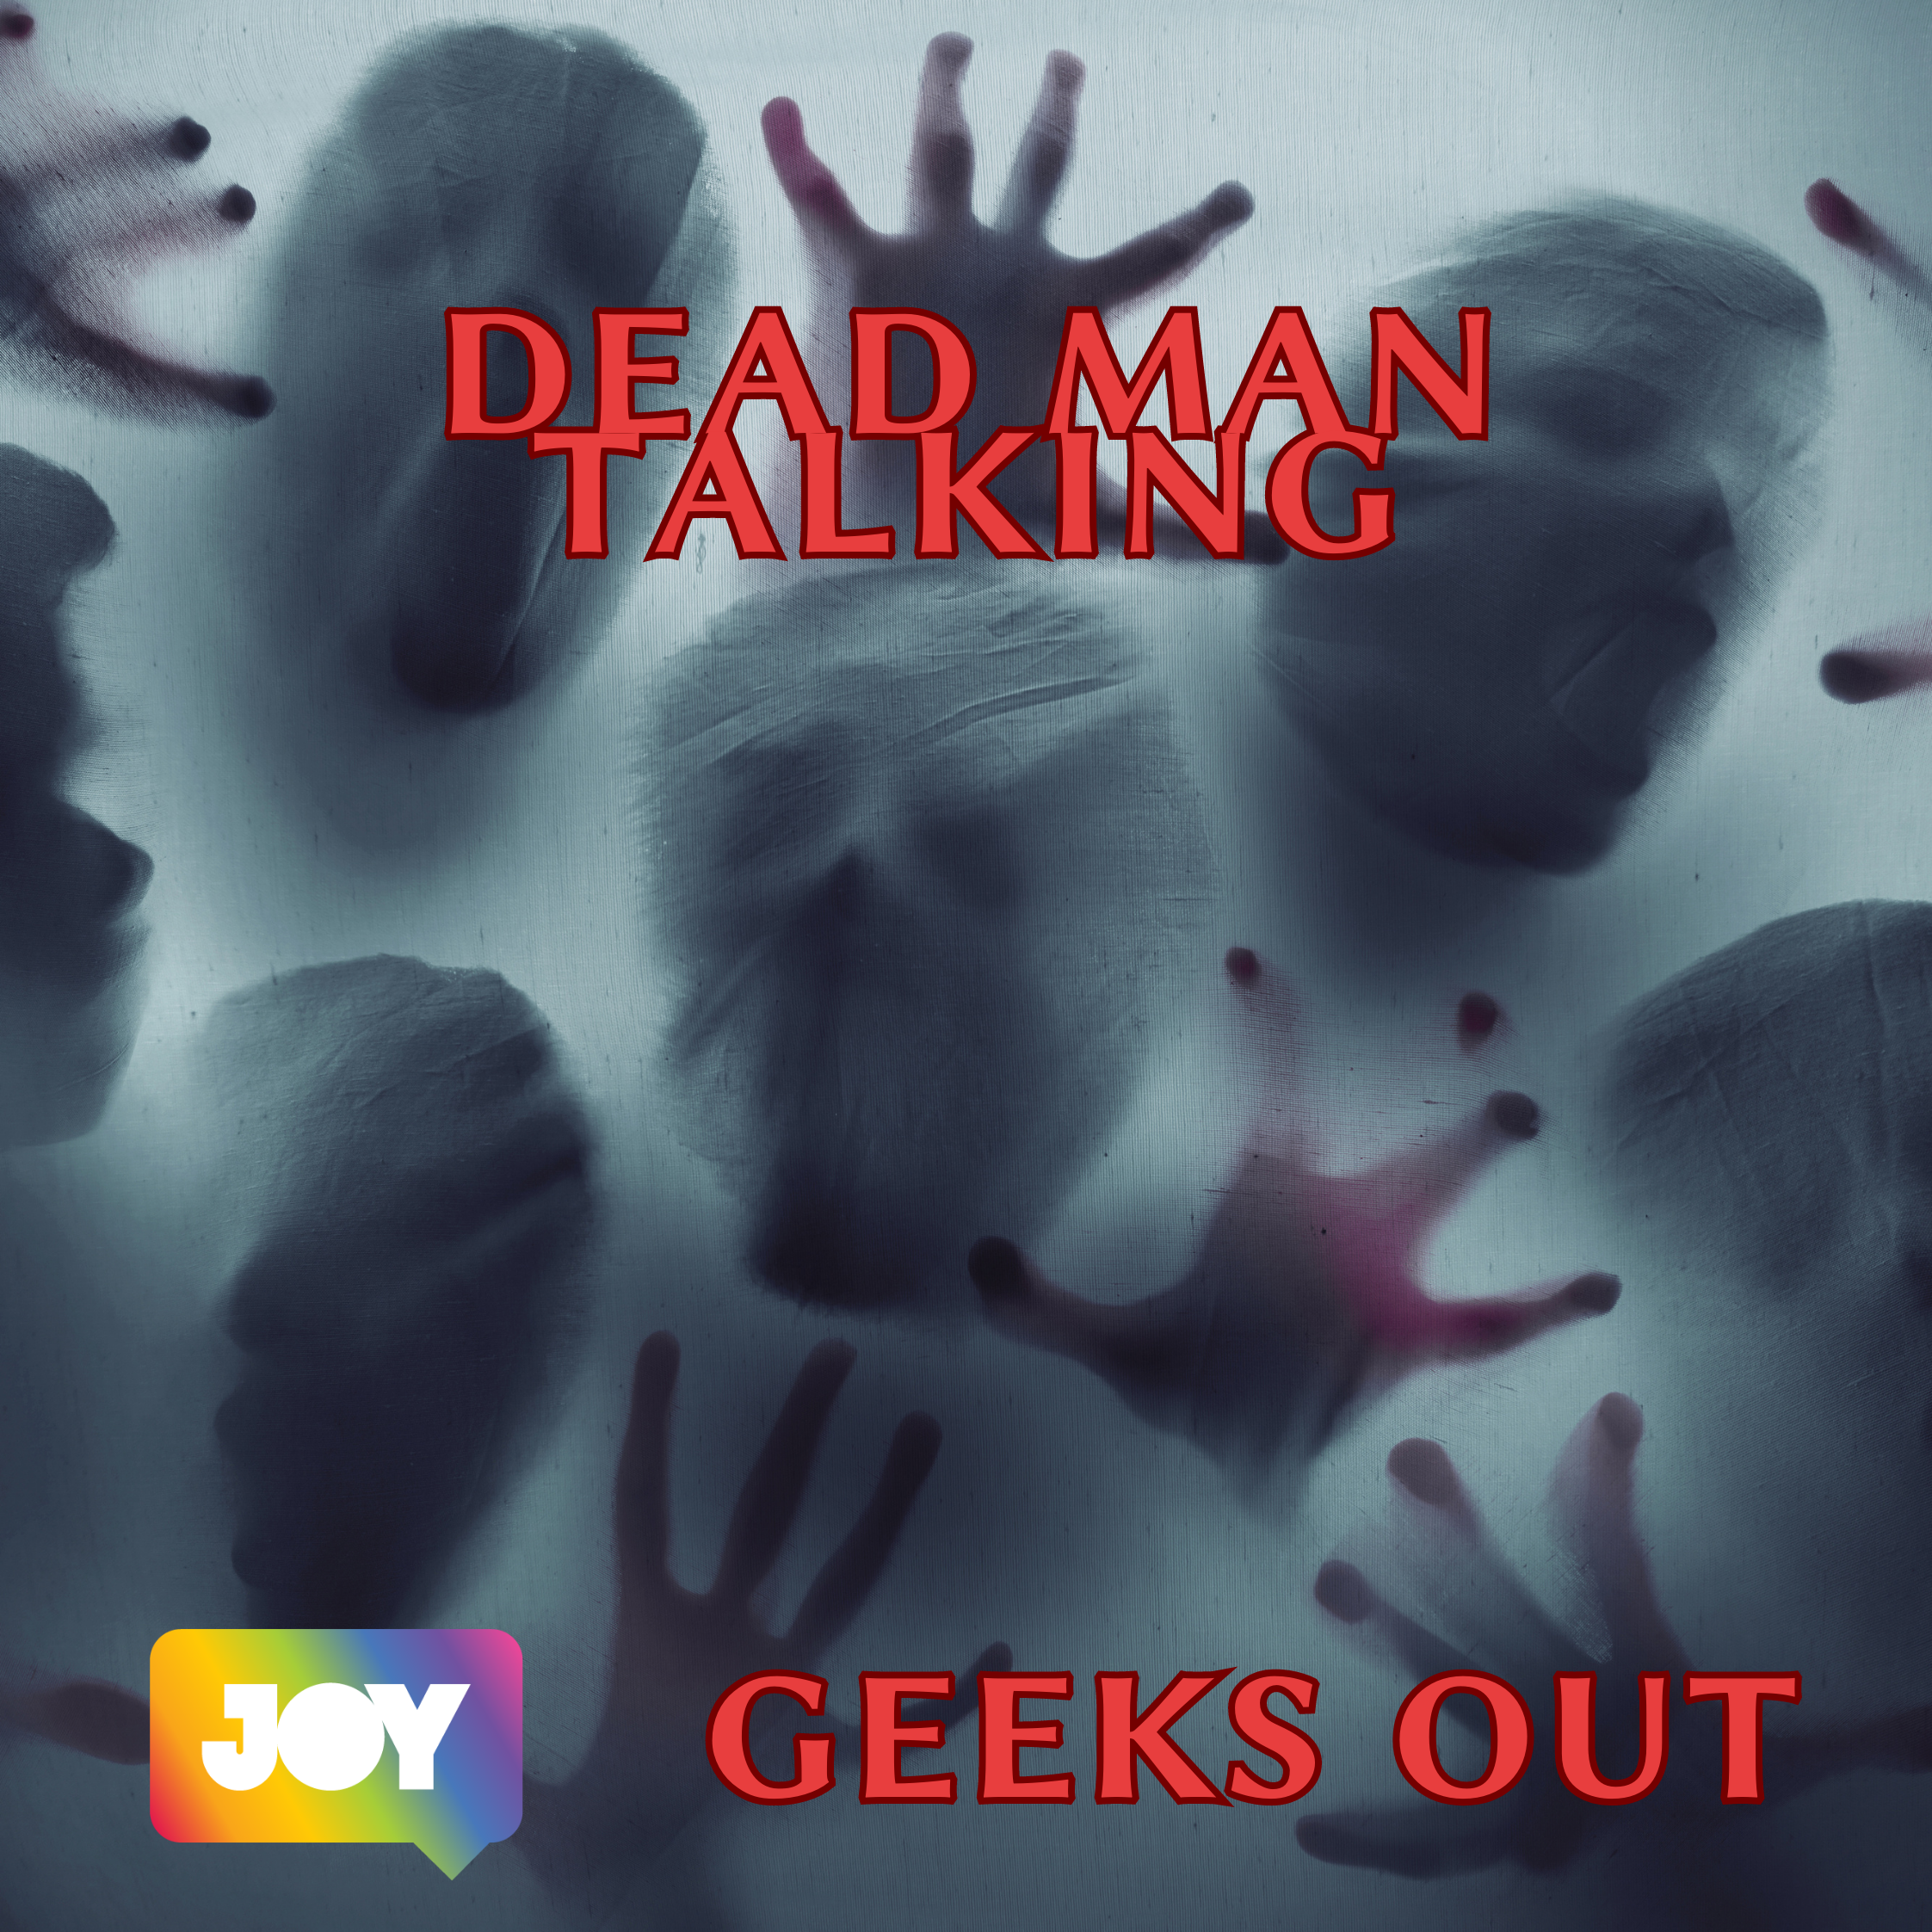 Dead Man Talking: A Talk to Me Review